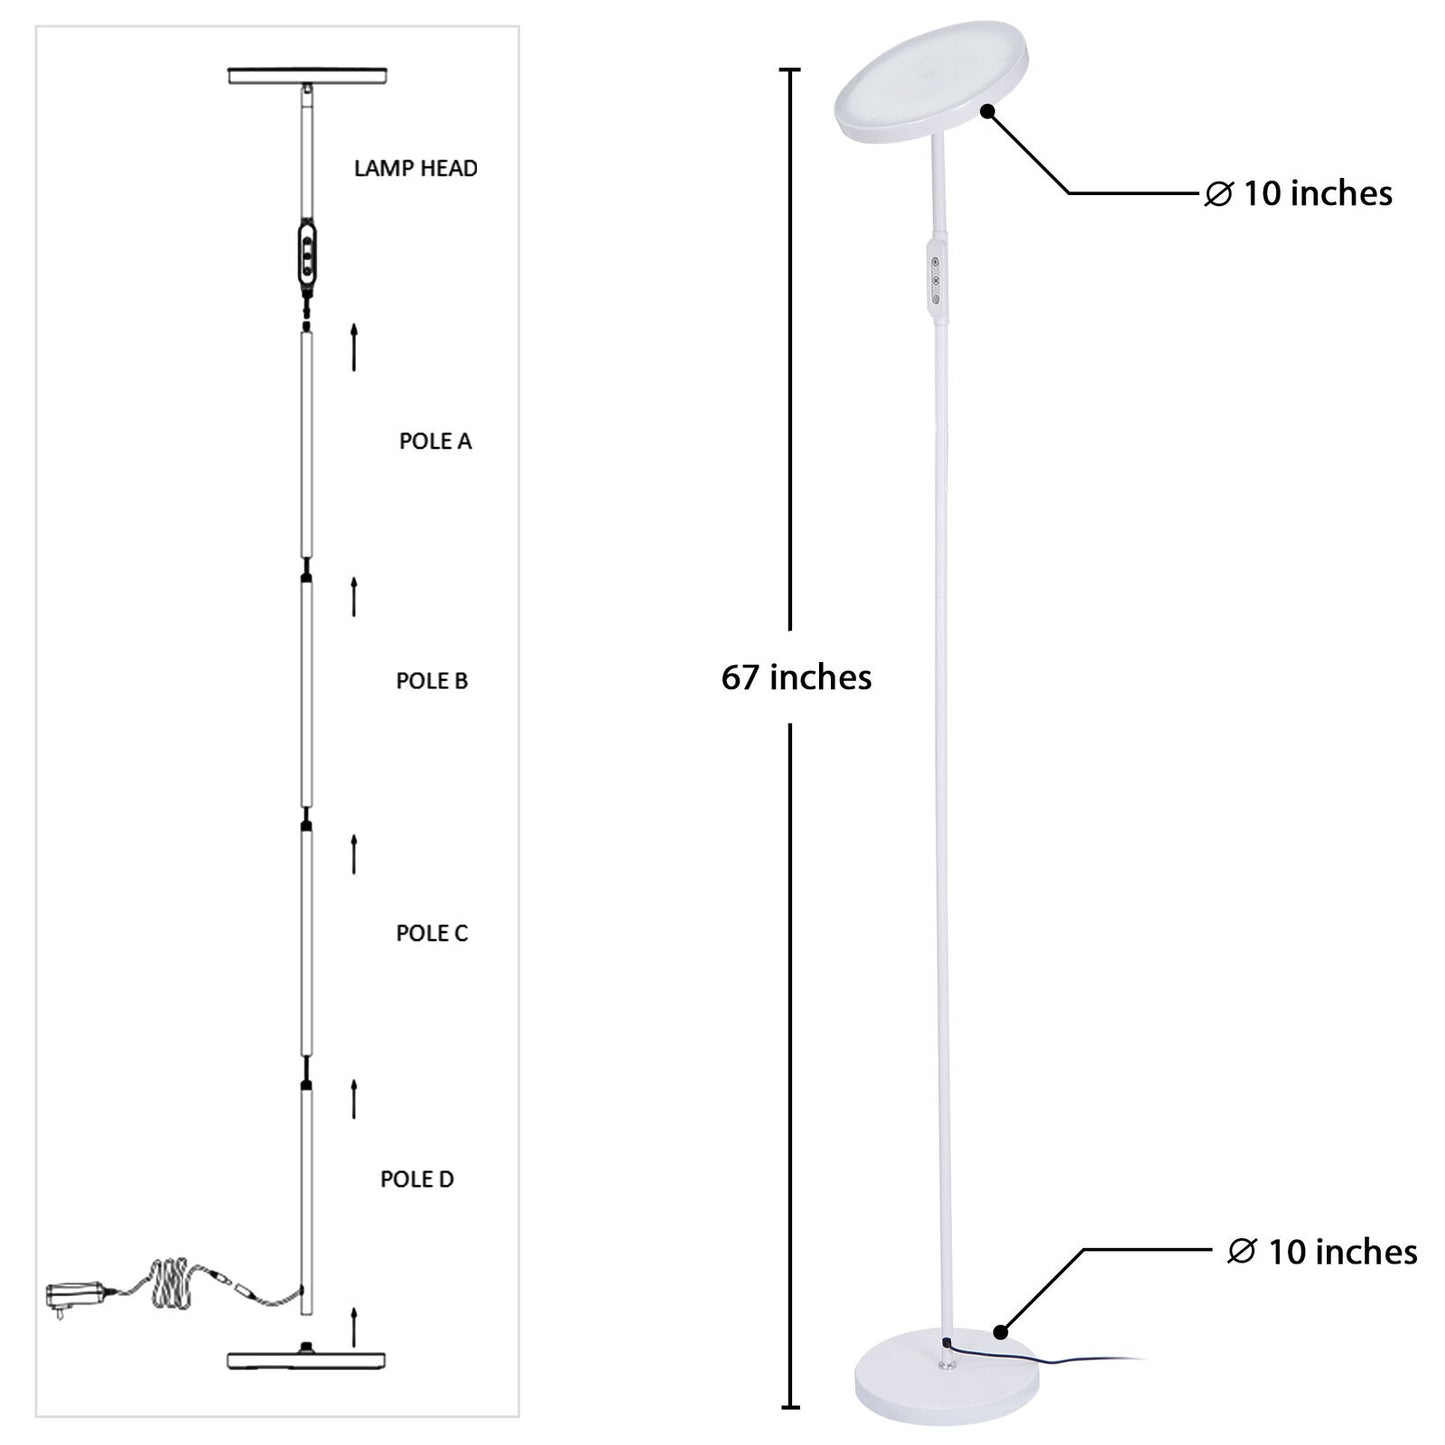 66" High LED Floor Lamp High Lumen Light  for Living Rooms and Offices Dimmable